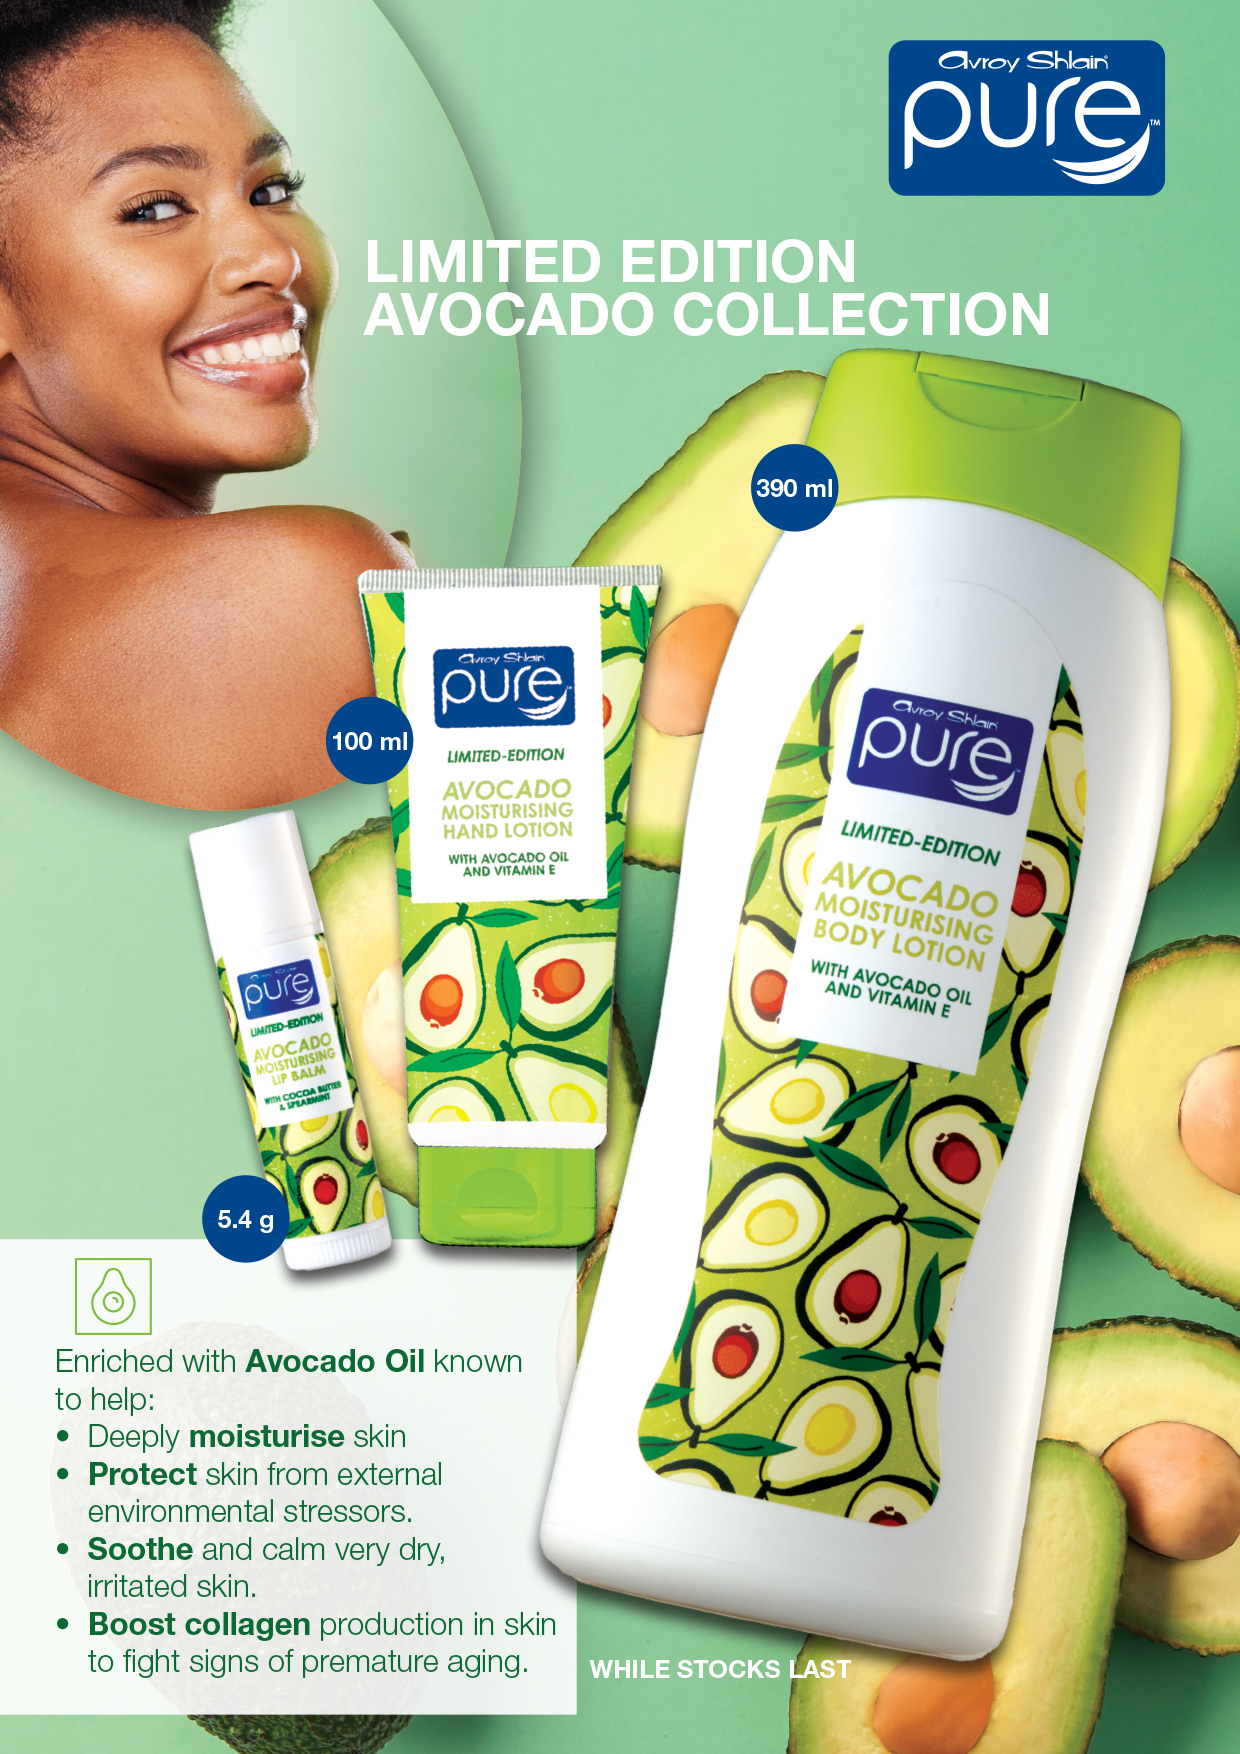 LIMITED EDITION AVOCADO COLLECTION